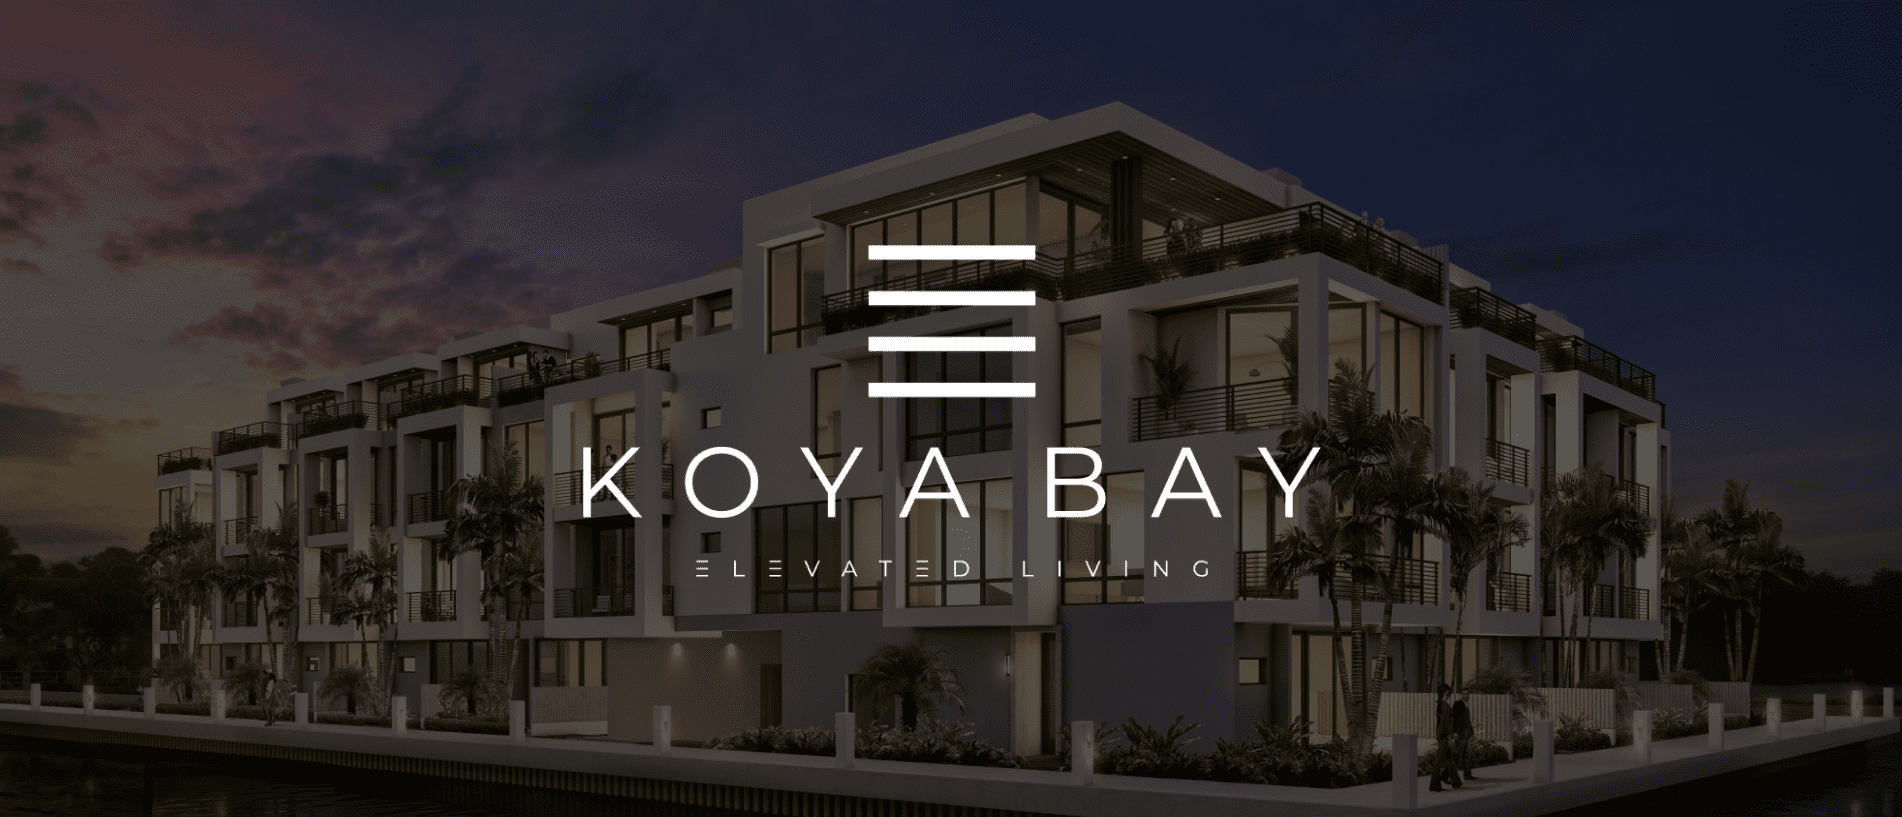 IU C&I Studios Page White Koya Bay Elevated Living logo on dimmed background of building